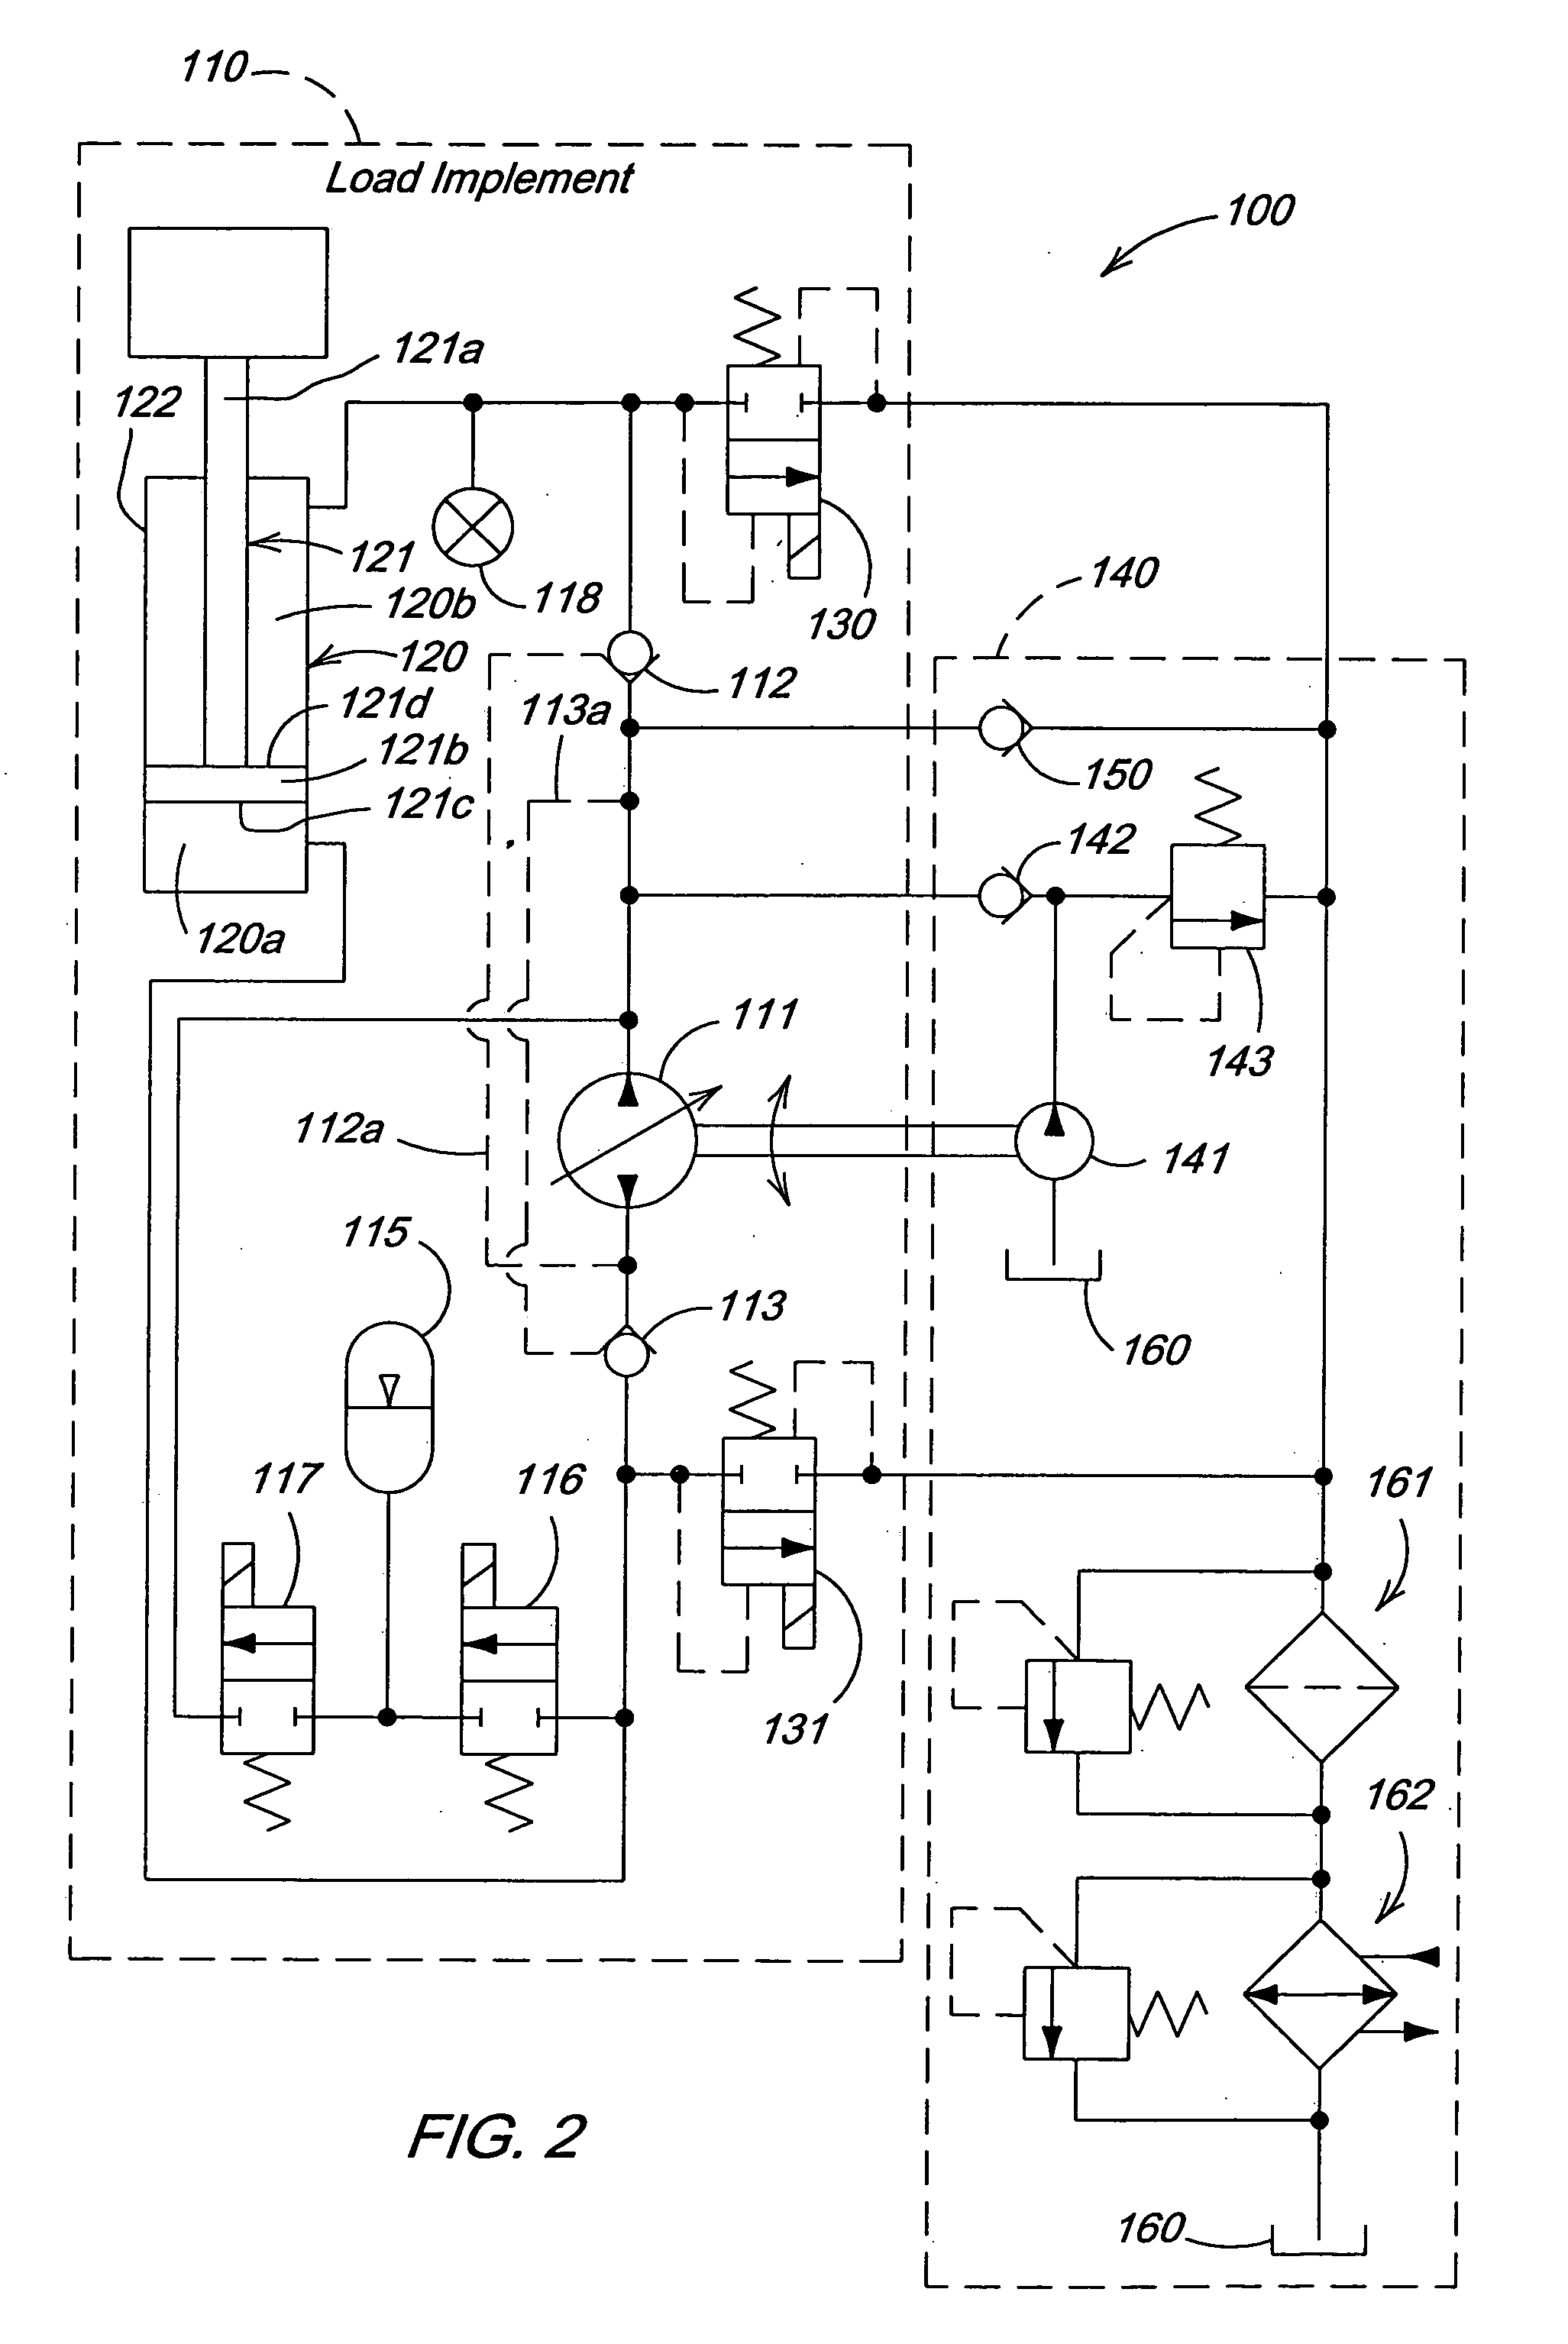 Closed circuit energy recovery system for a work implement